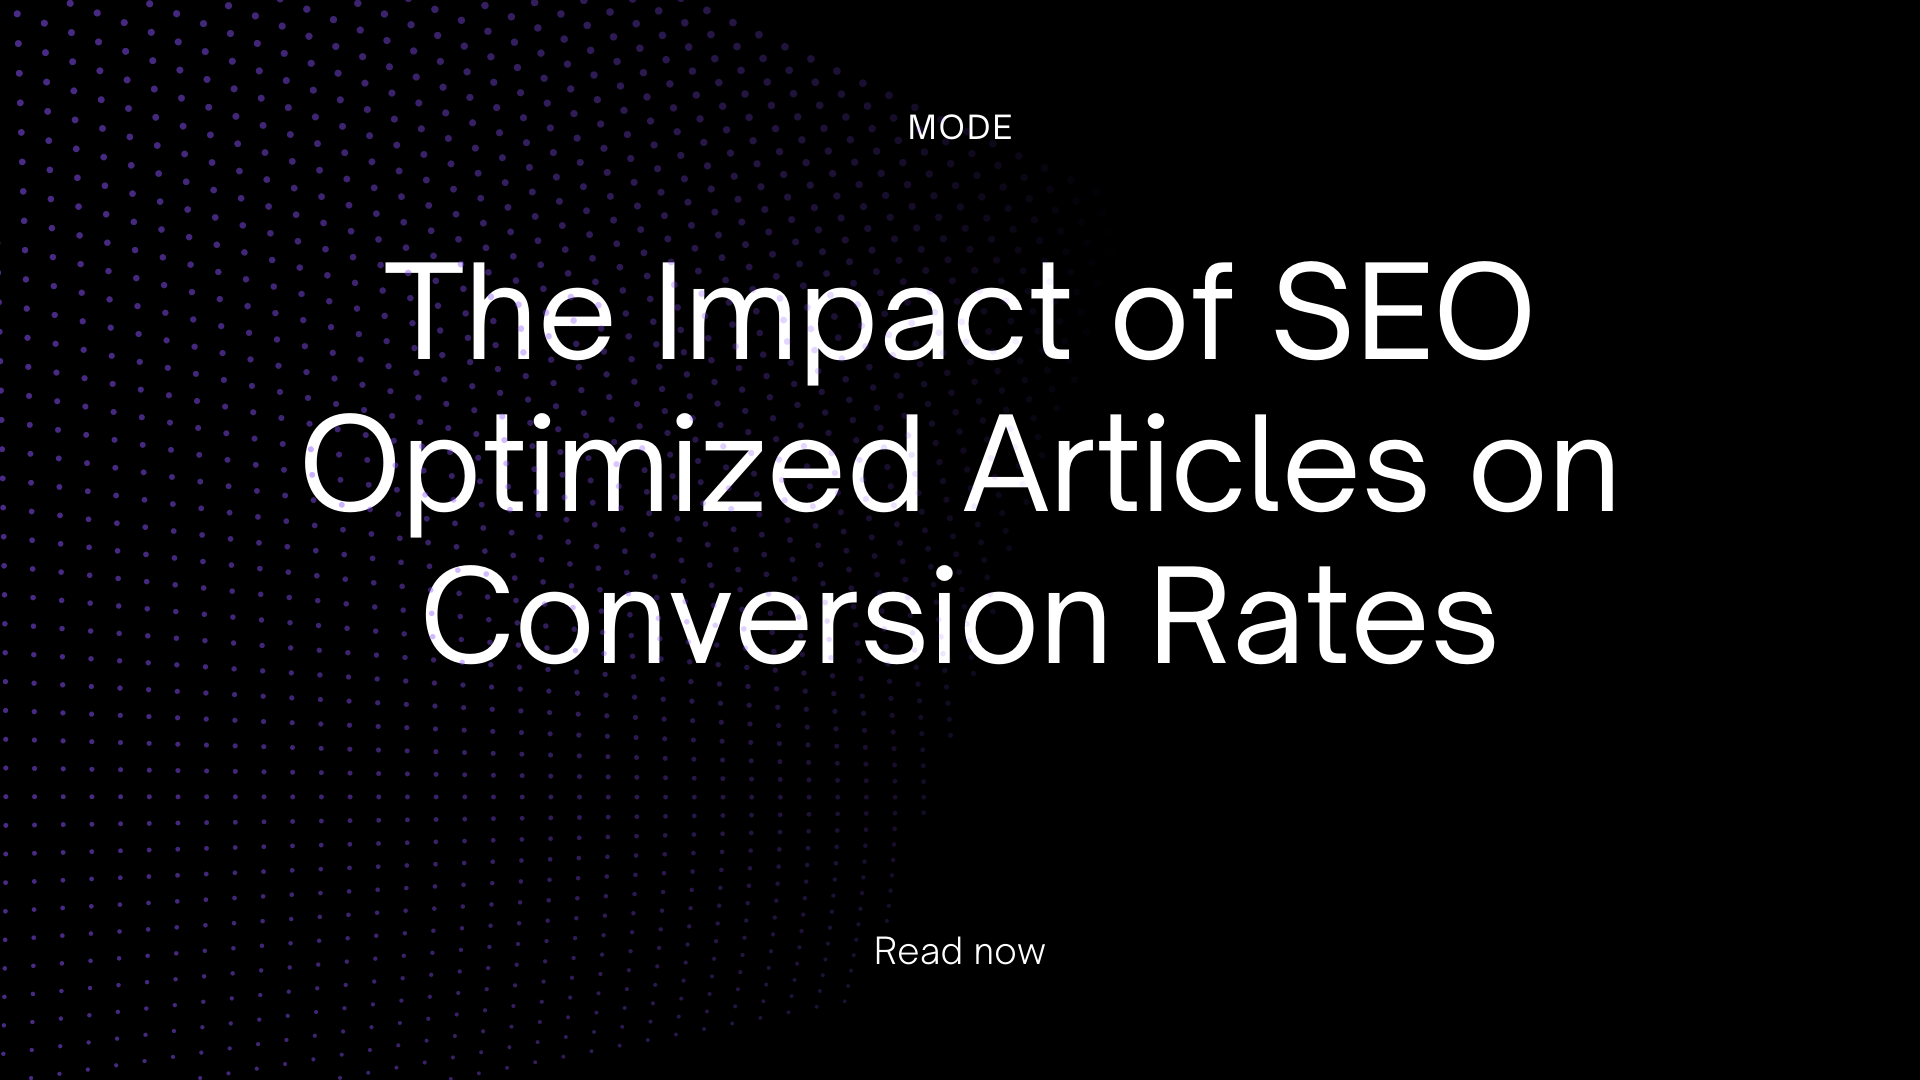 The Impact of SEO Optimized Articles on Conversion Rates